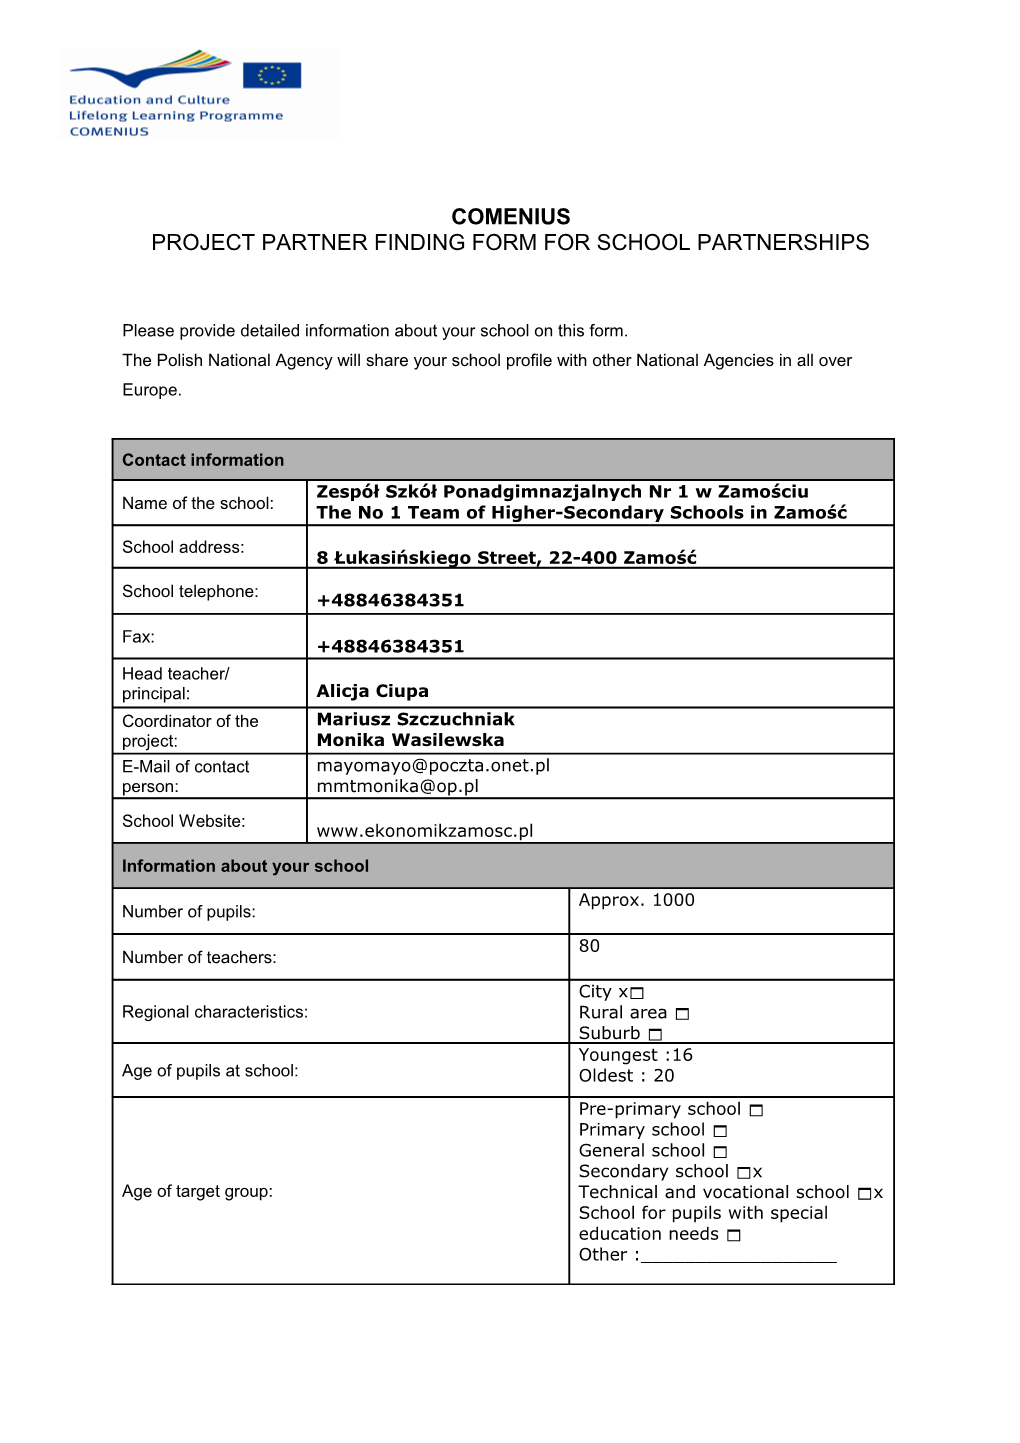 Project Partner Finding Form for School Partnerships